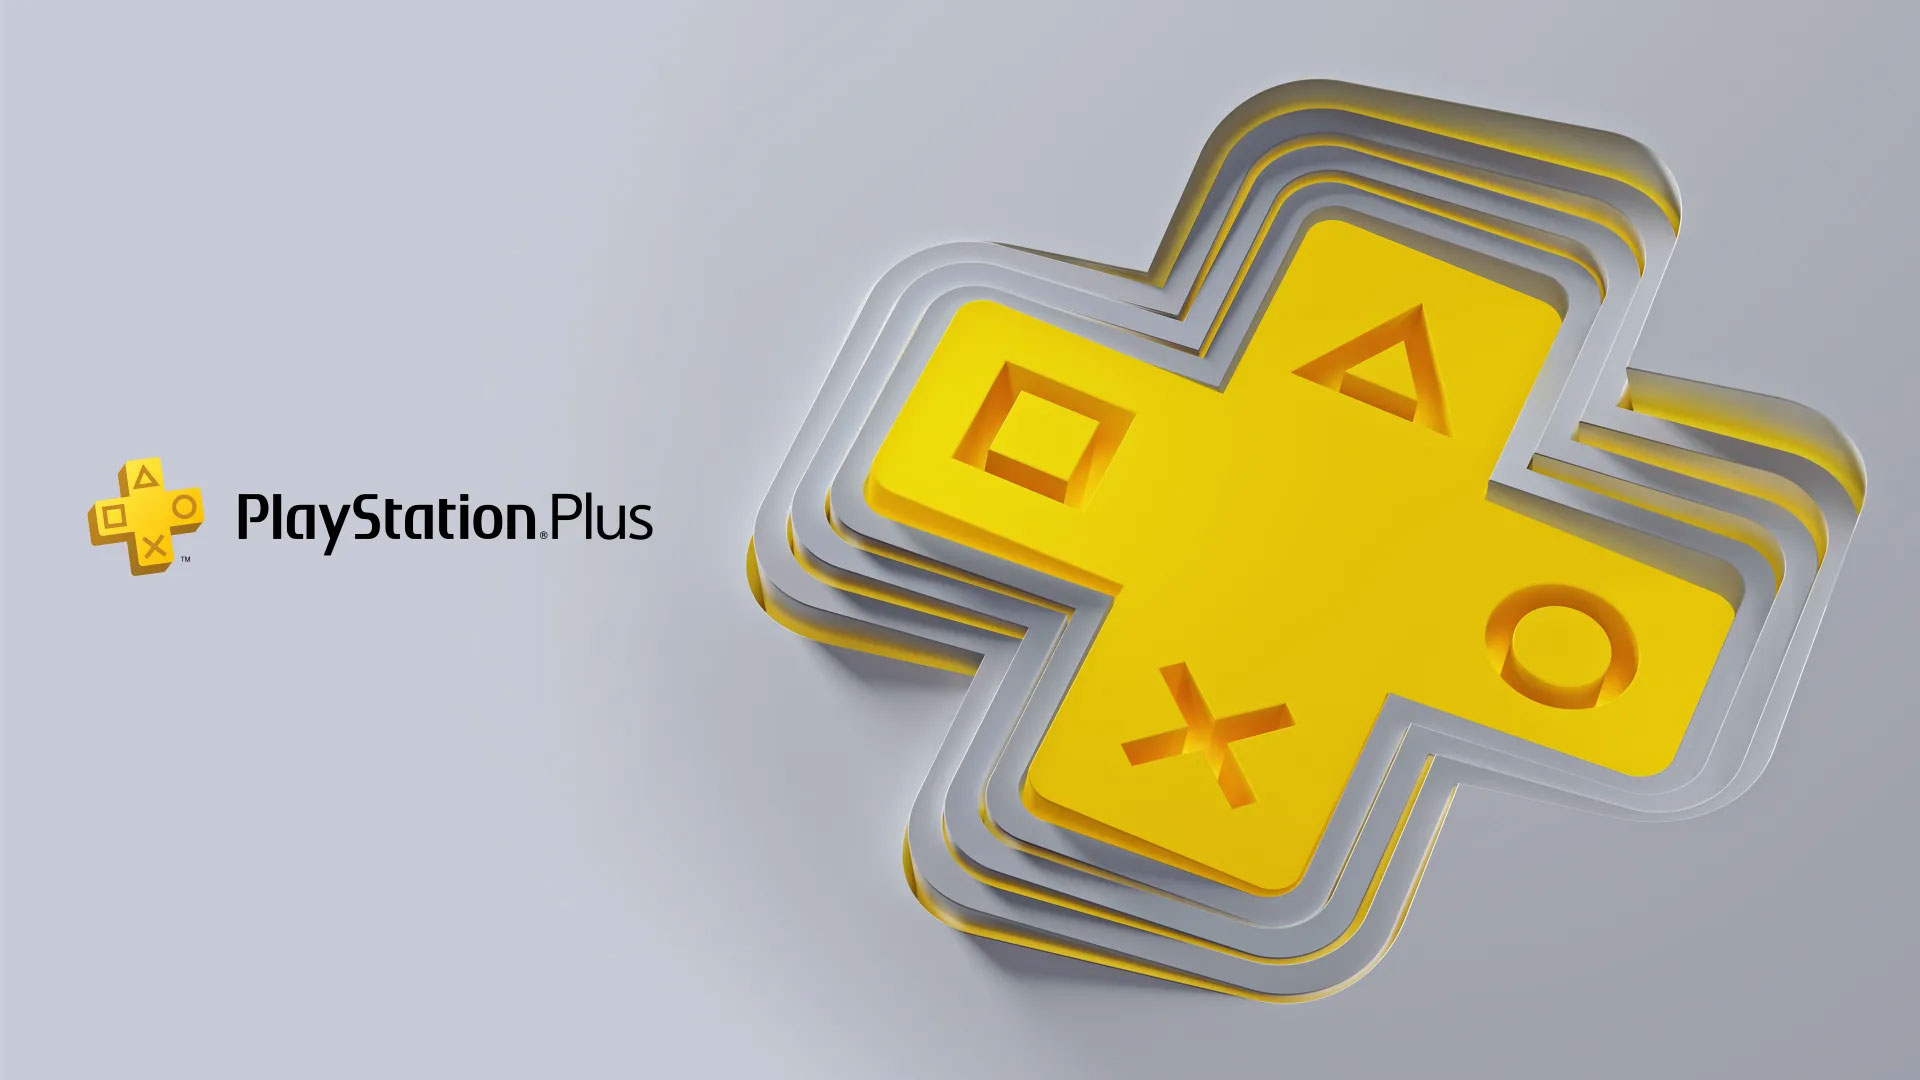 PlayStation Plus is increasing the price of its 12-month subscription